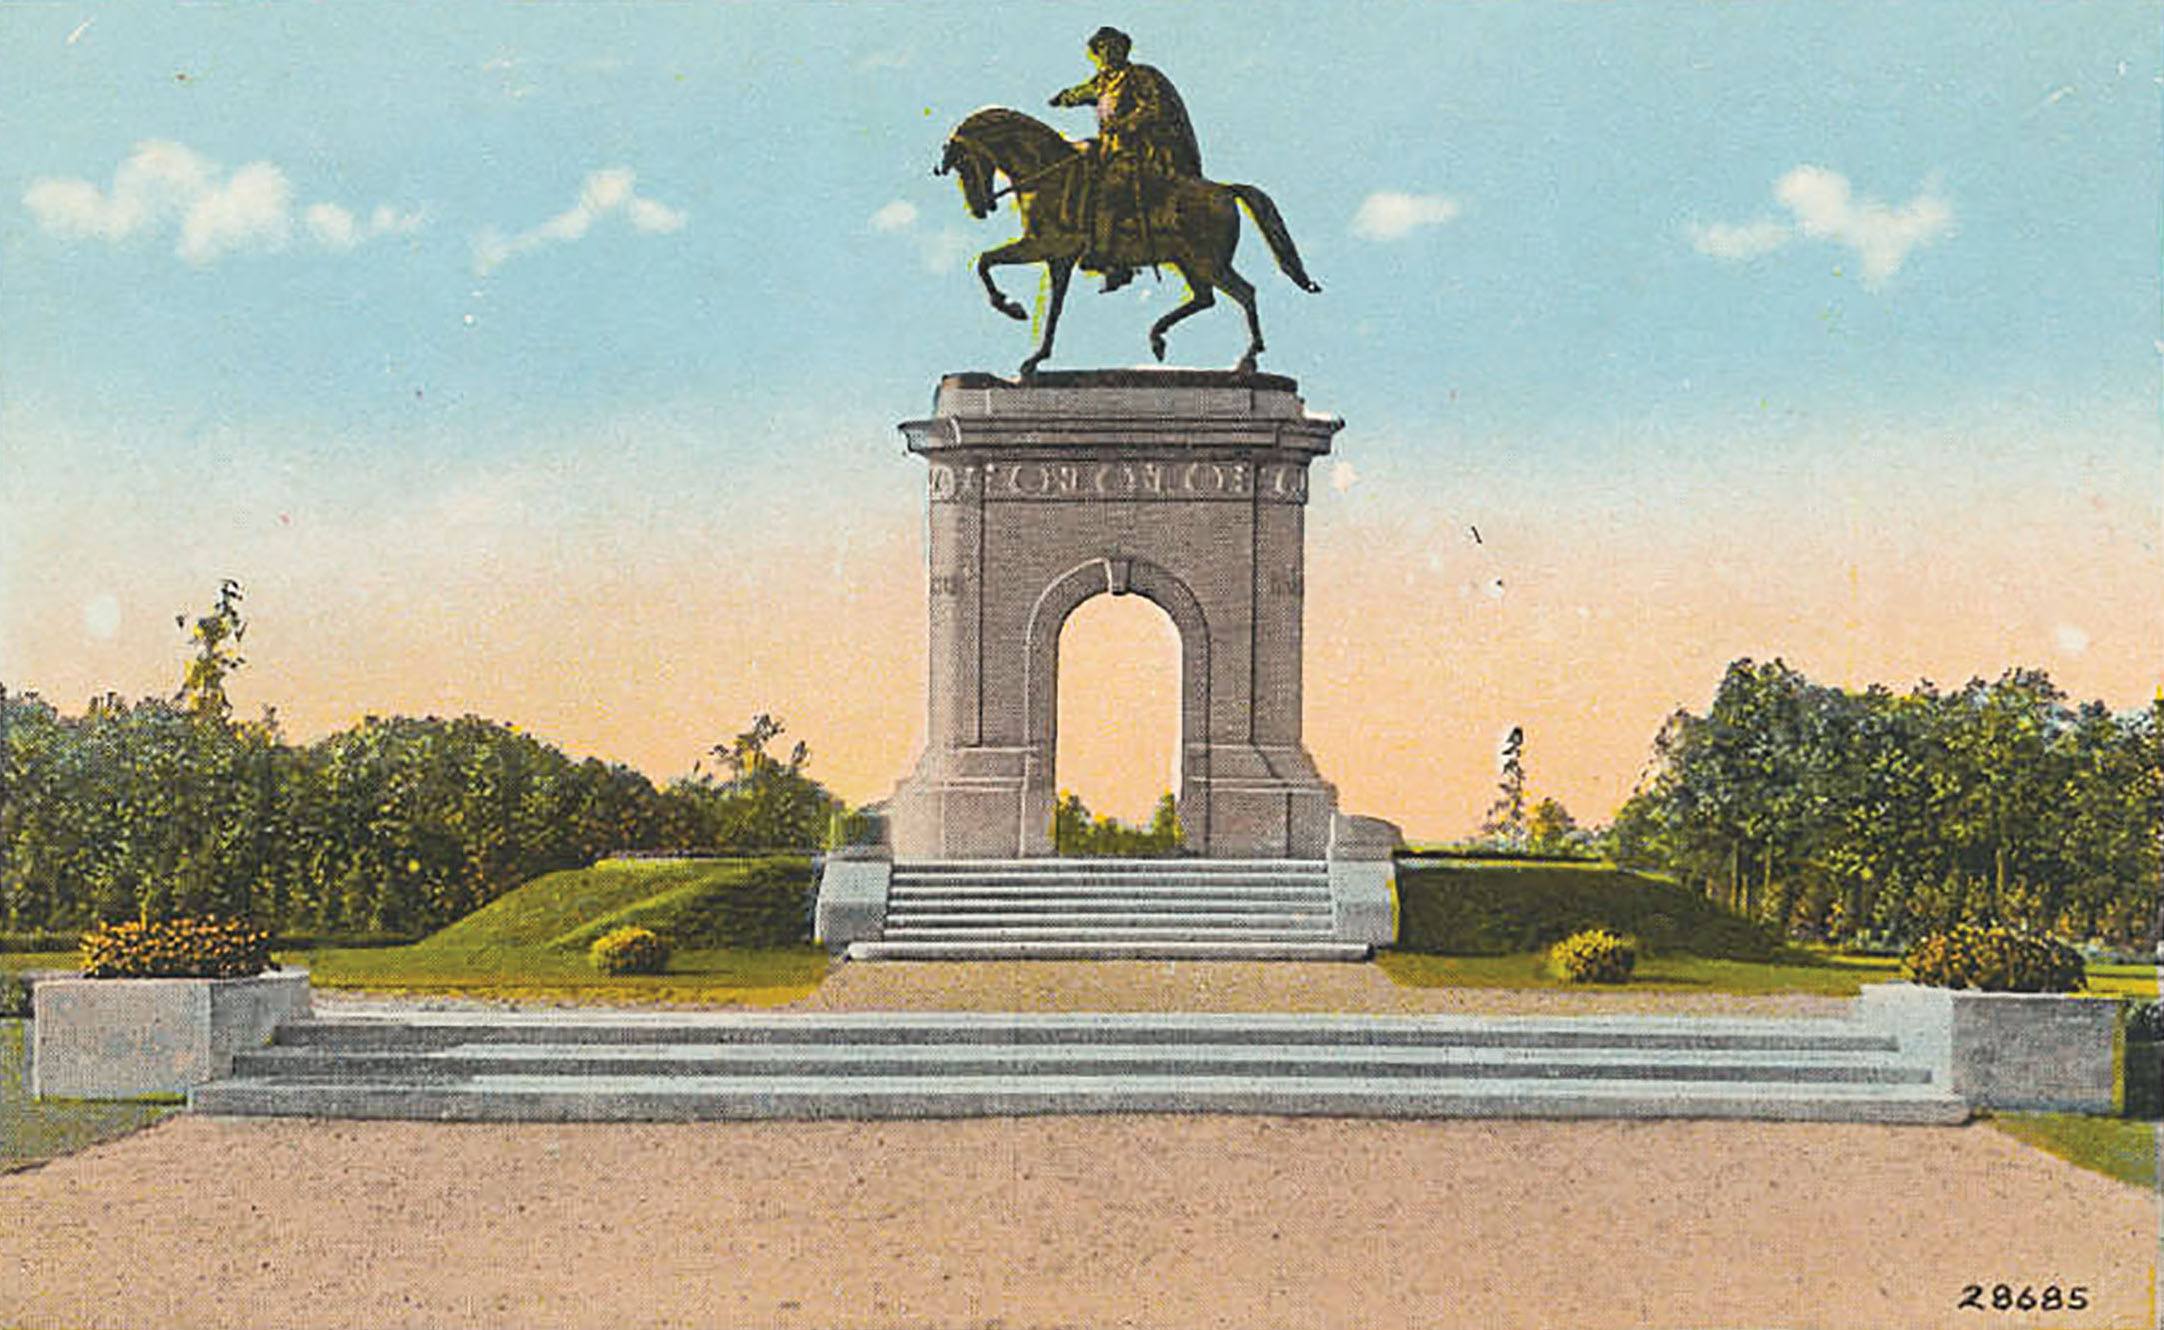 An old-fashioned color drawing of a statue of Sam Houston on a horse, still on display at Hermann Park